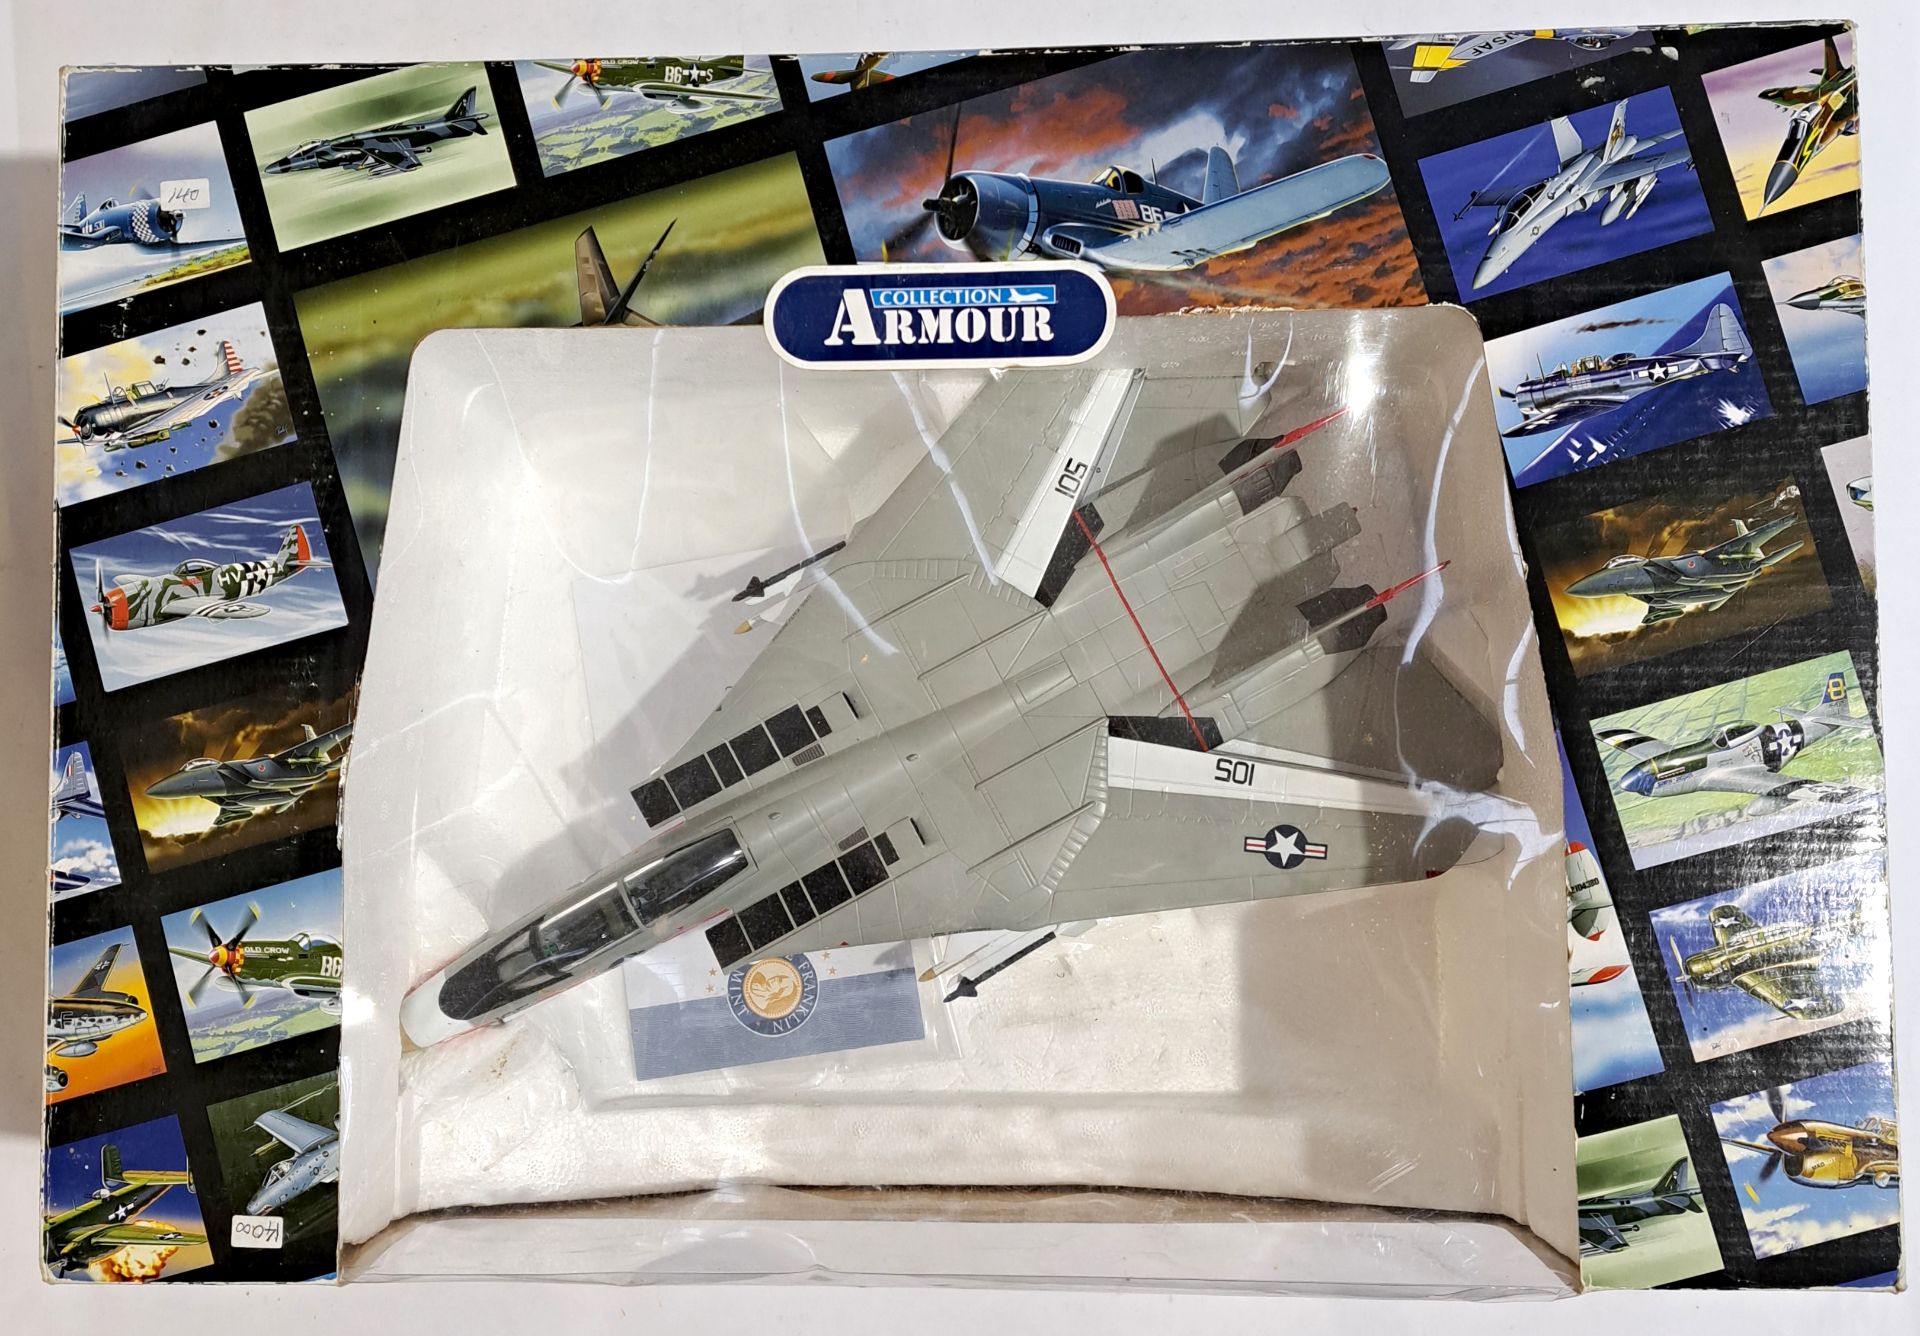 Franklin Mint  "Armour Collection", a boxed 1:48 scale B11B593 F14 Tomcat VF1 Wolfpack.